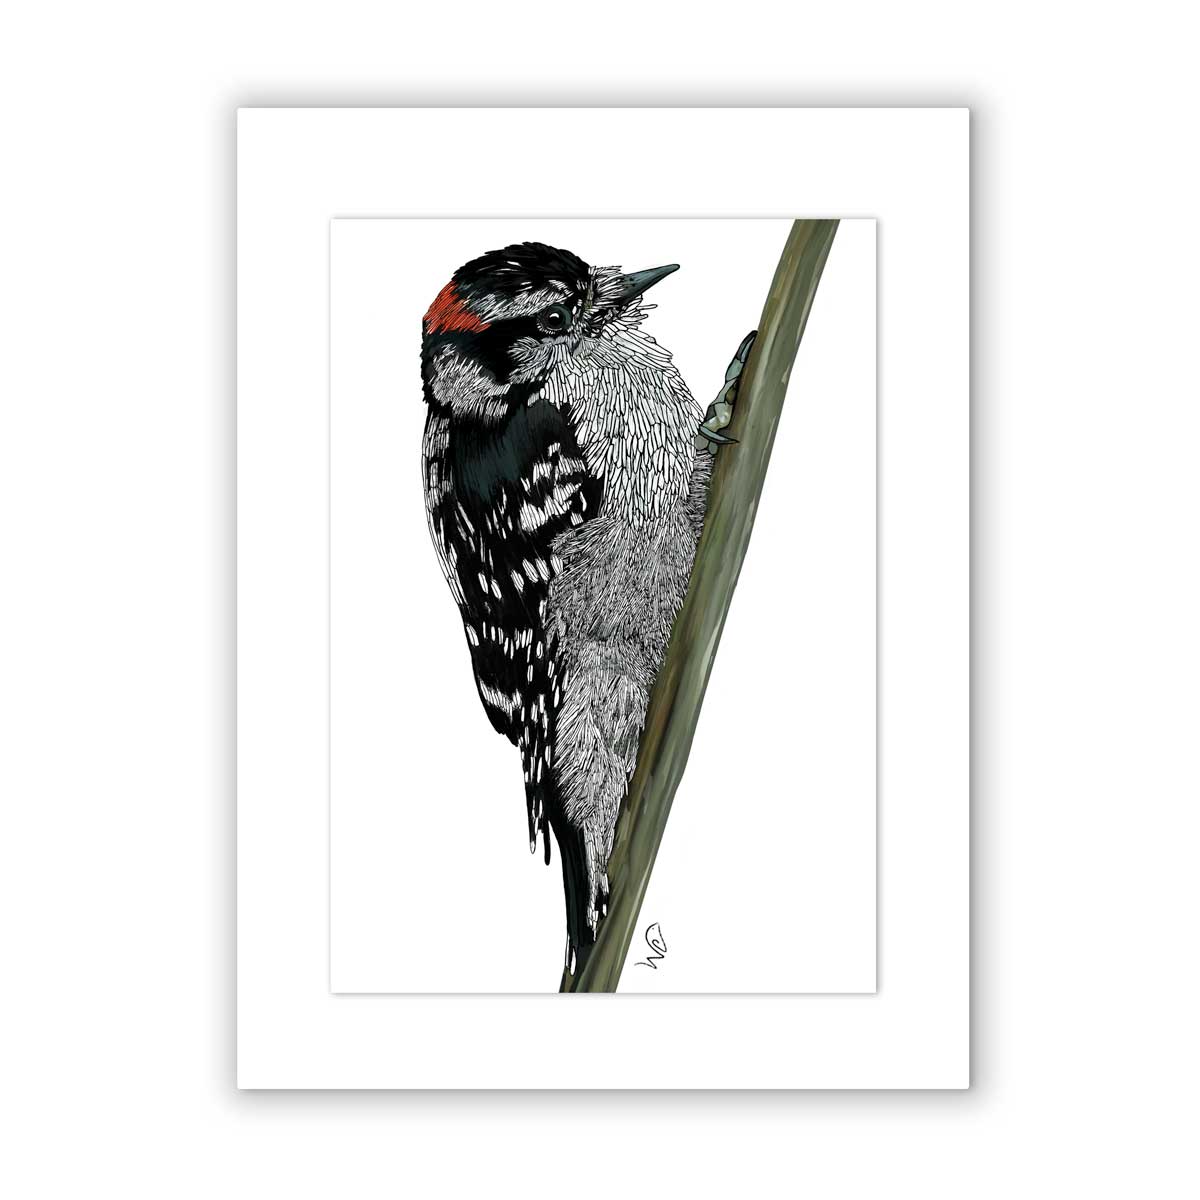 Signed & Matted Print - Downy Woodpecker